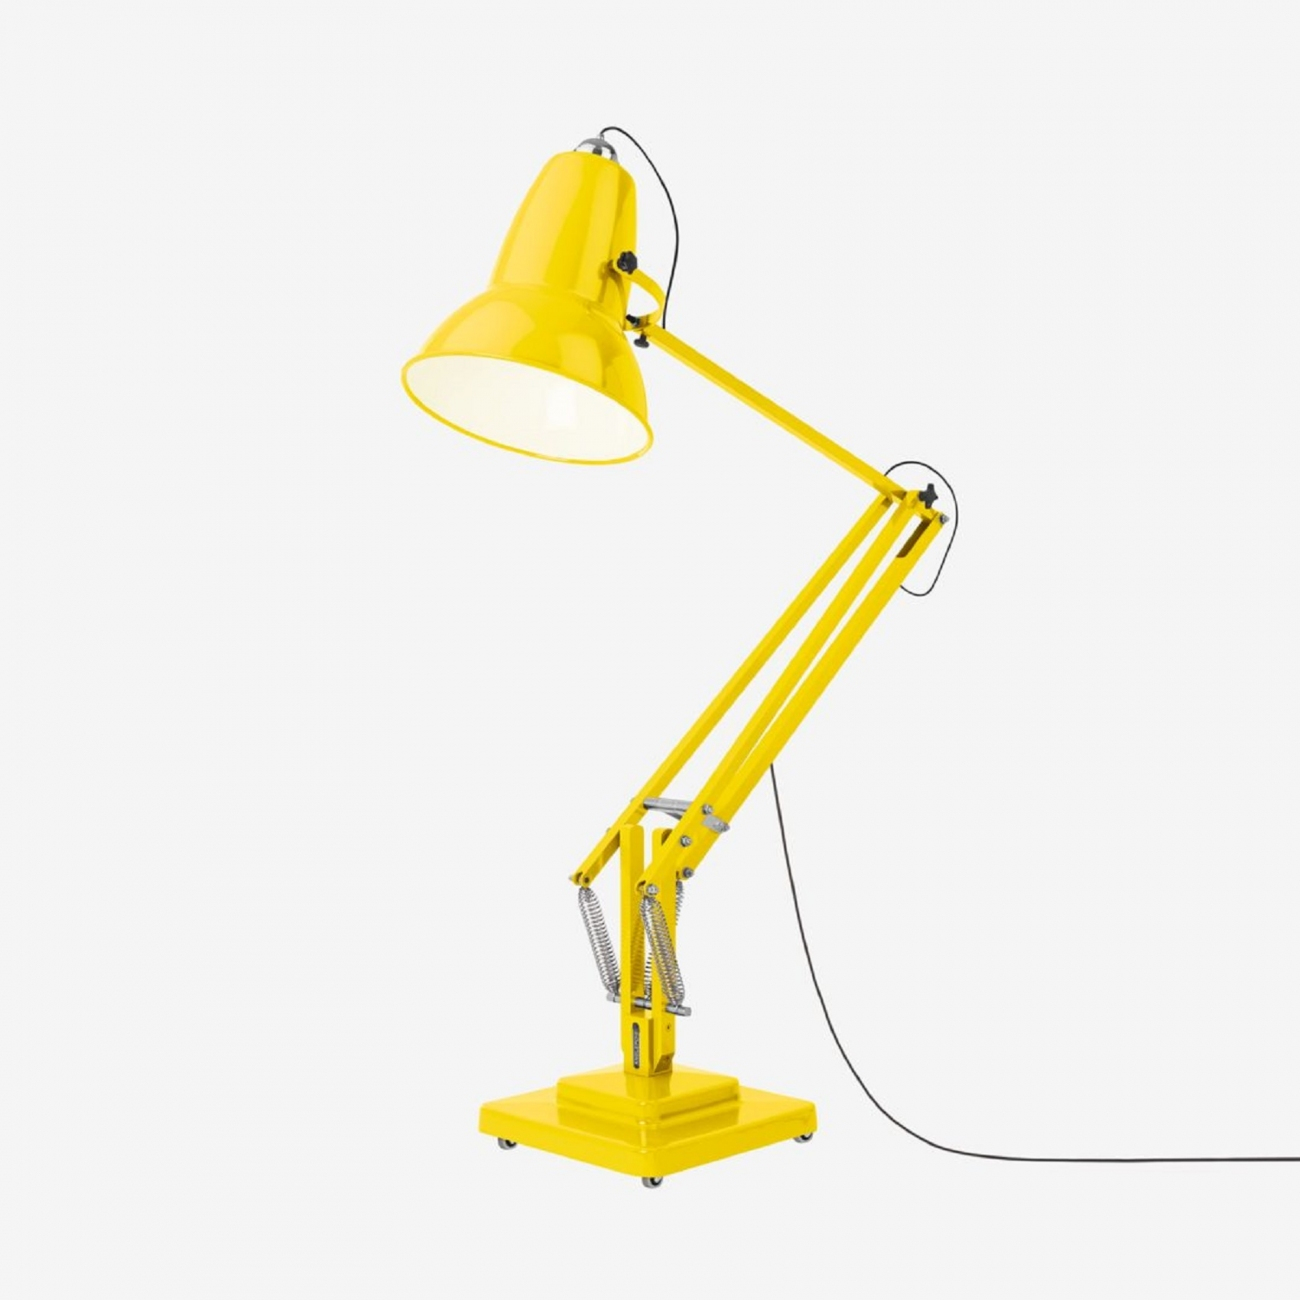 Anglepoise Original 1227 Giant Outdoor Floor Lamp Tattahome within size 1300 X 1300